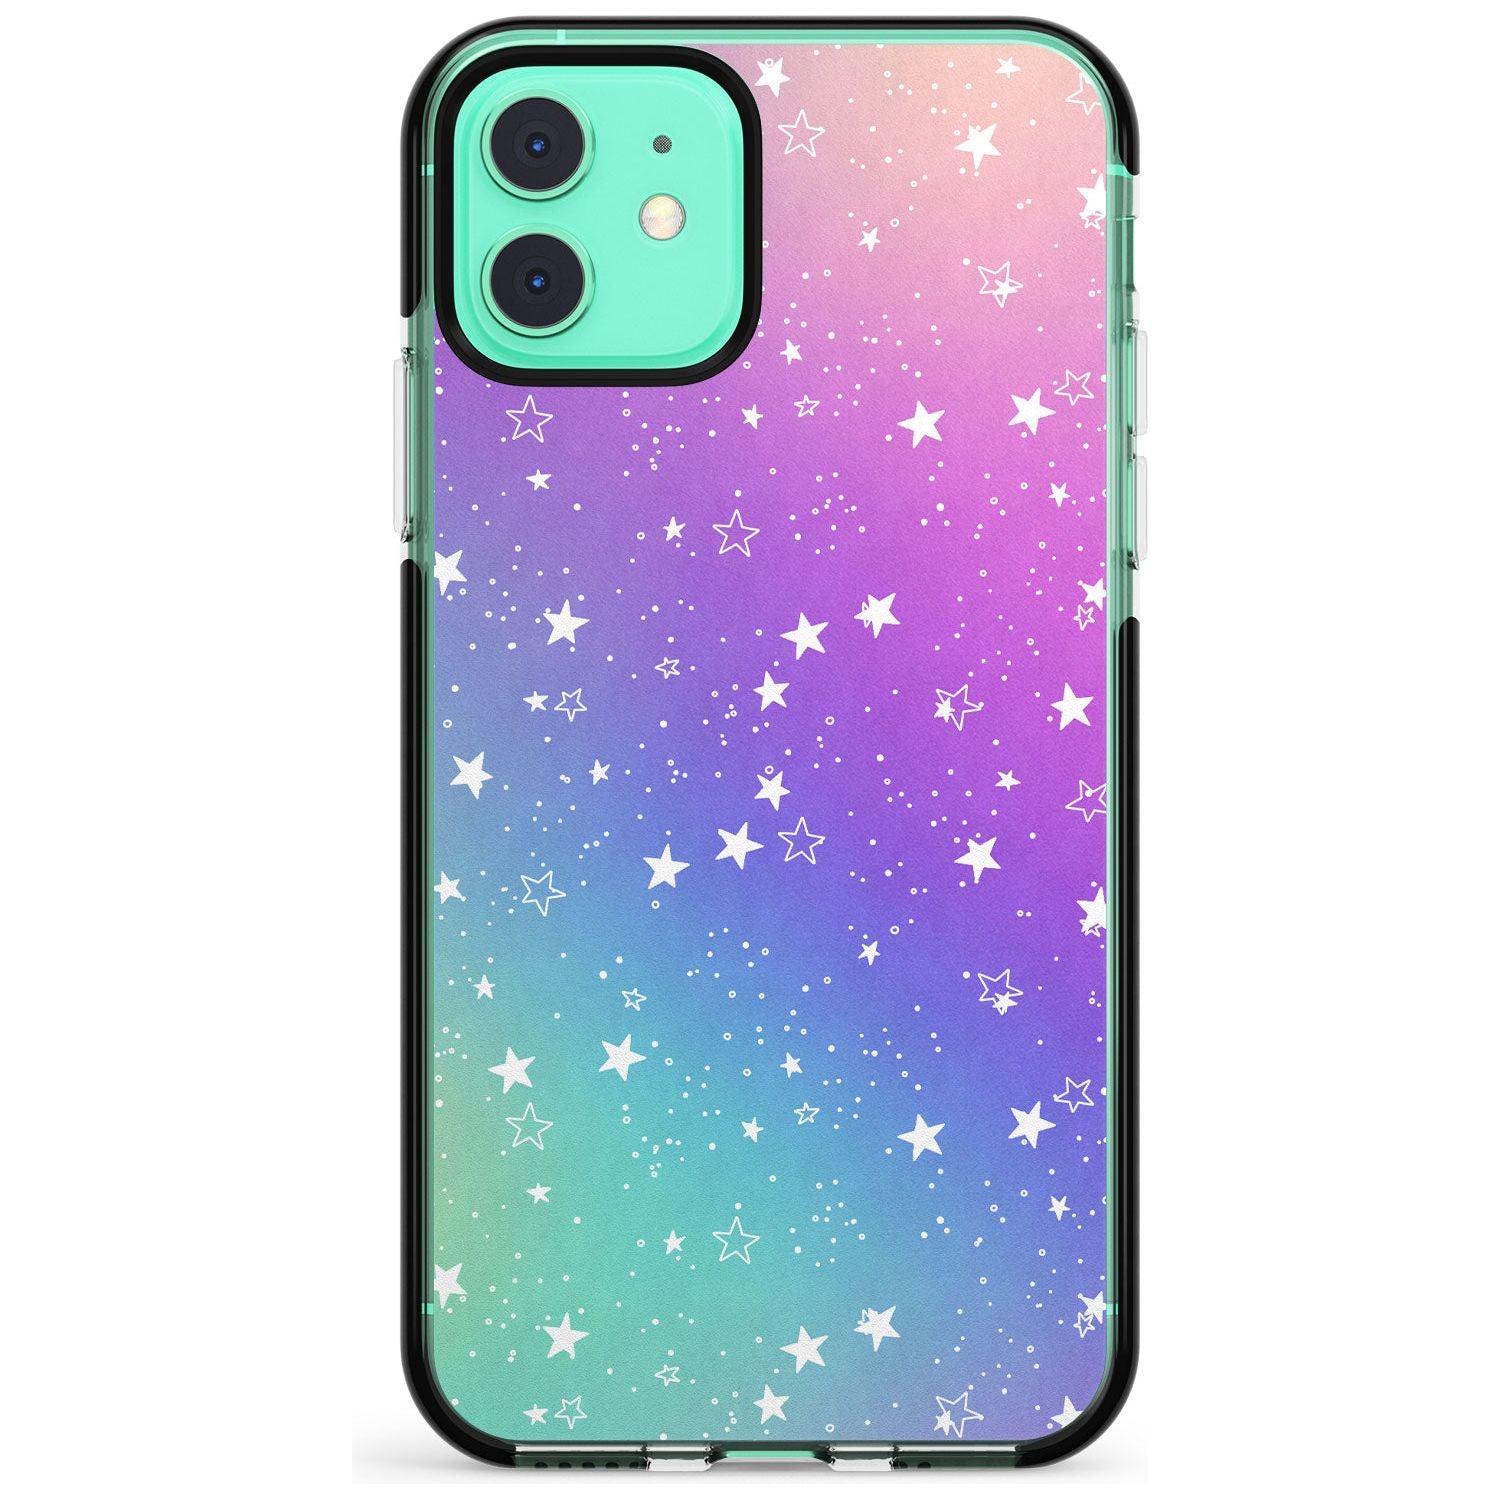 White Stars on Pastels Pink Fade Impact Phone Case for iPhone 11 Pro Max